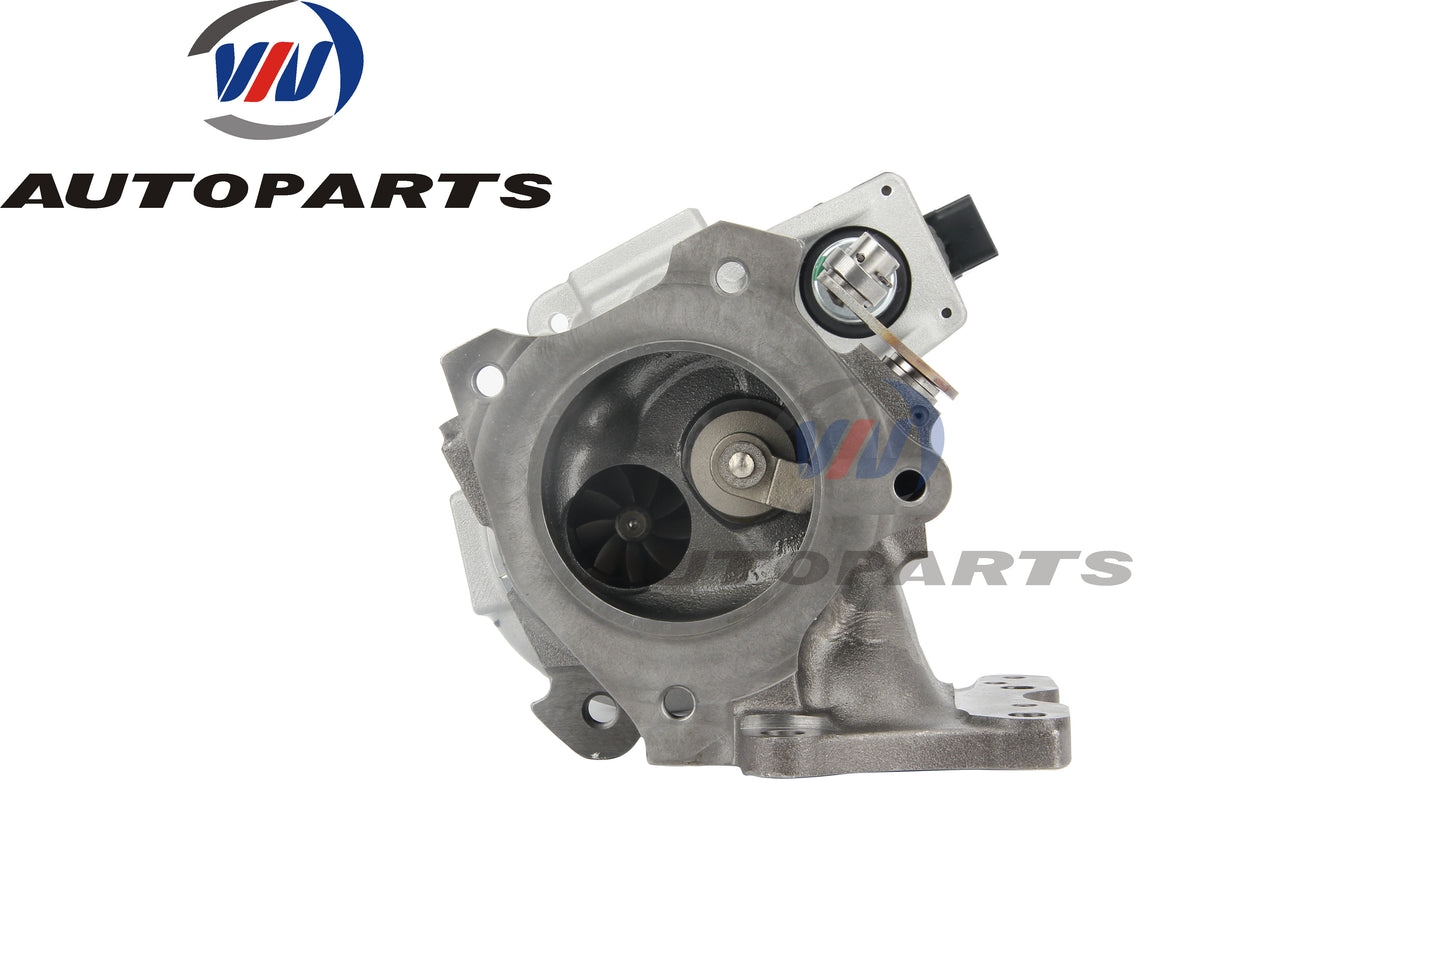 Upgraded TD04 Turbocharger for 2015+ 10th Gen Civic Si 1.5 T L15B7 up to 350+horse power